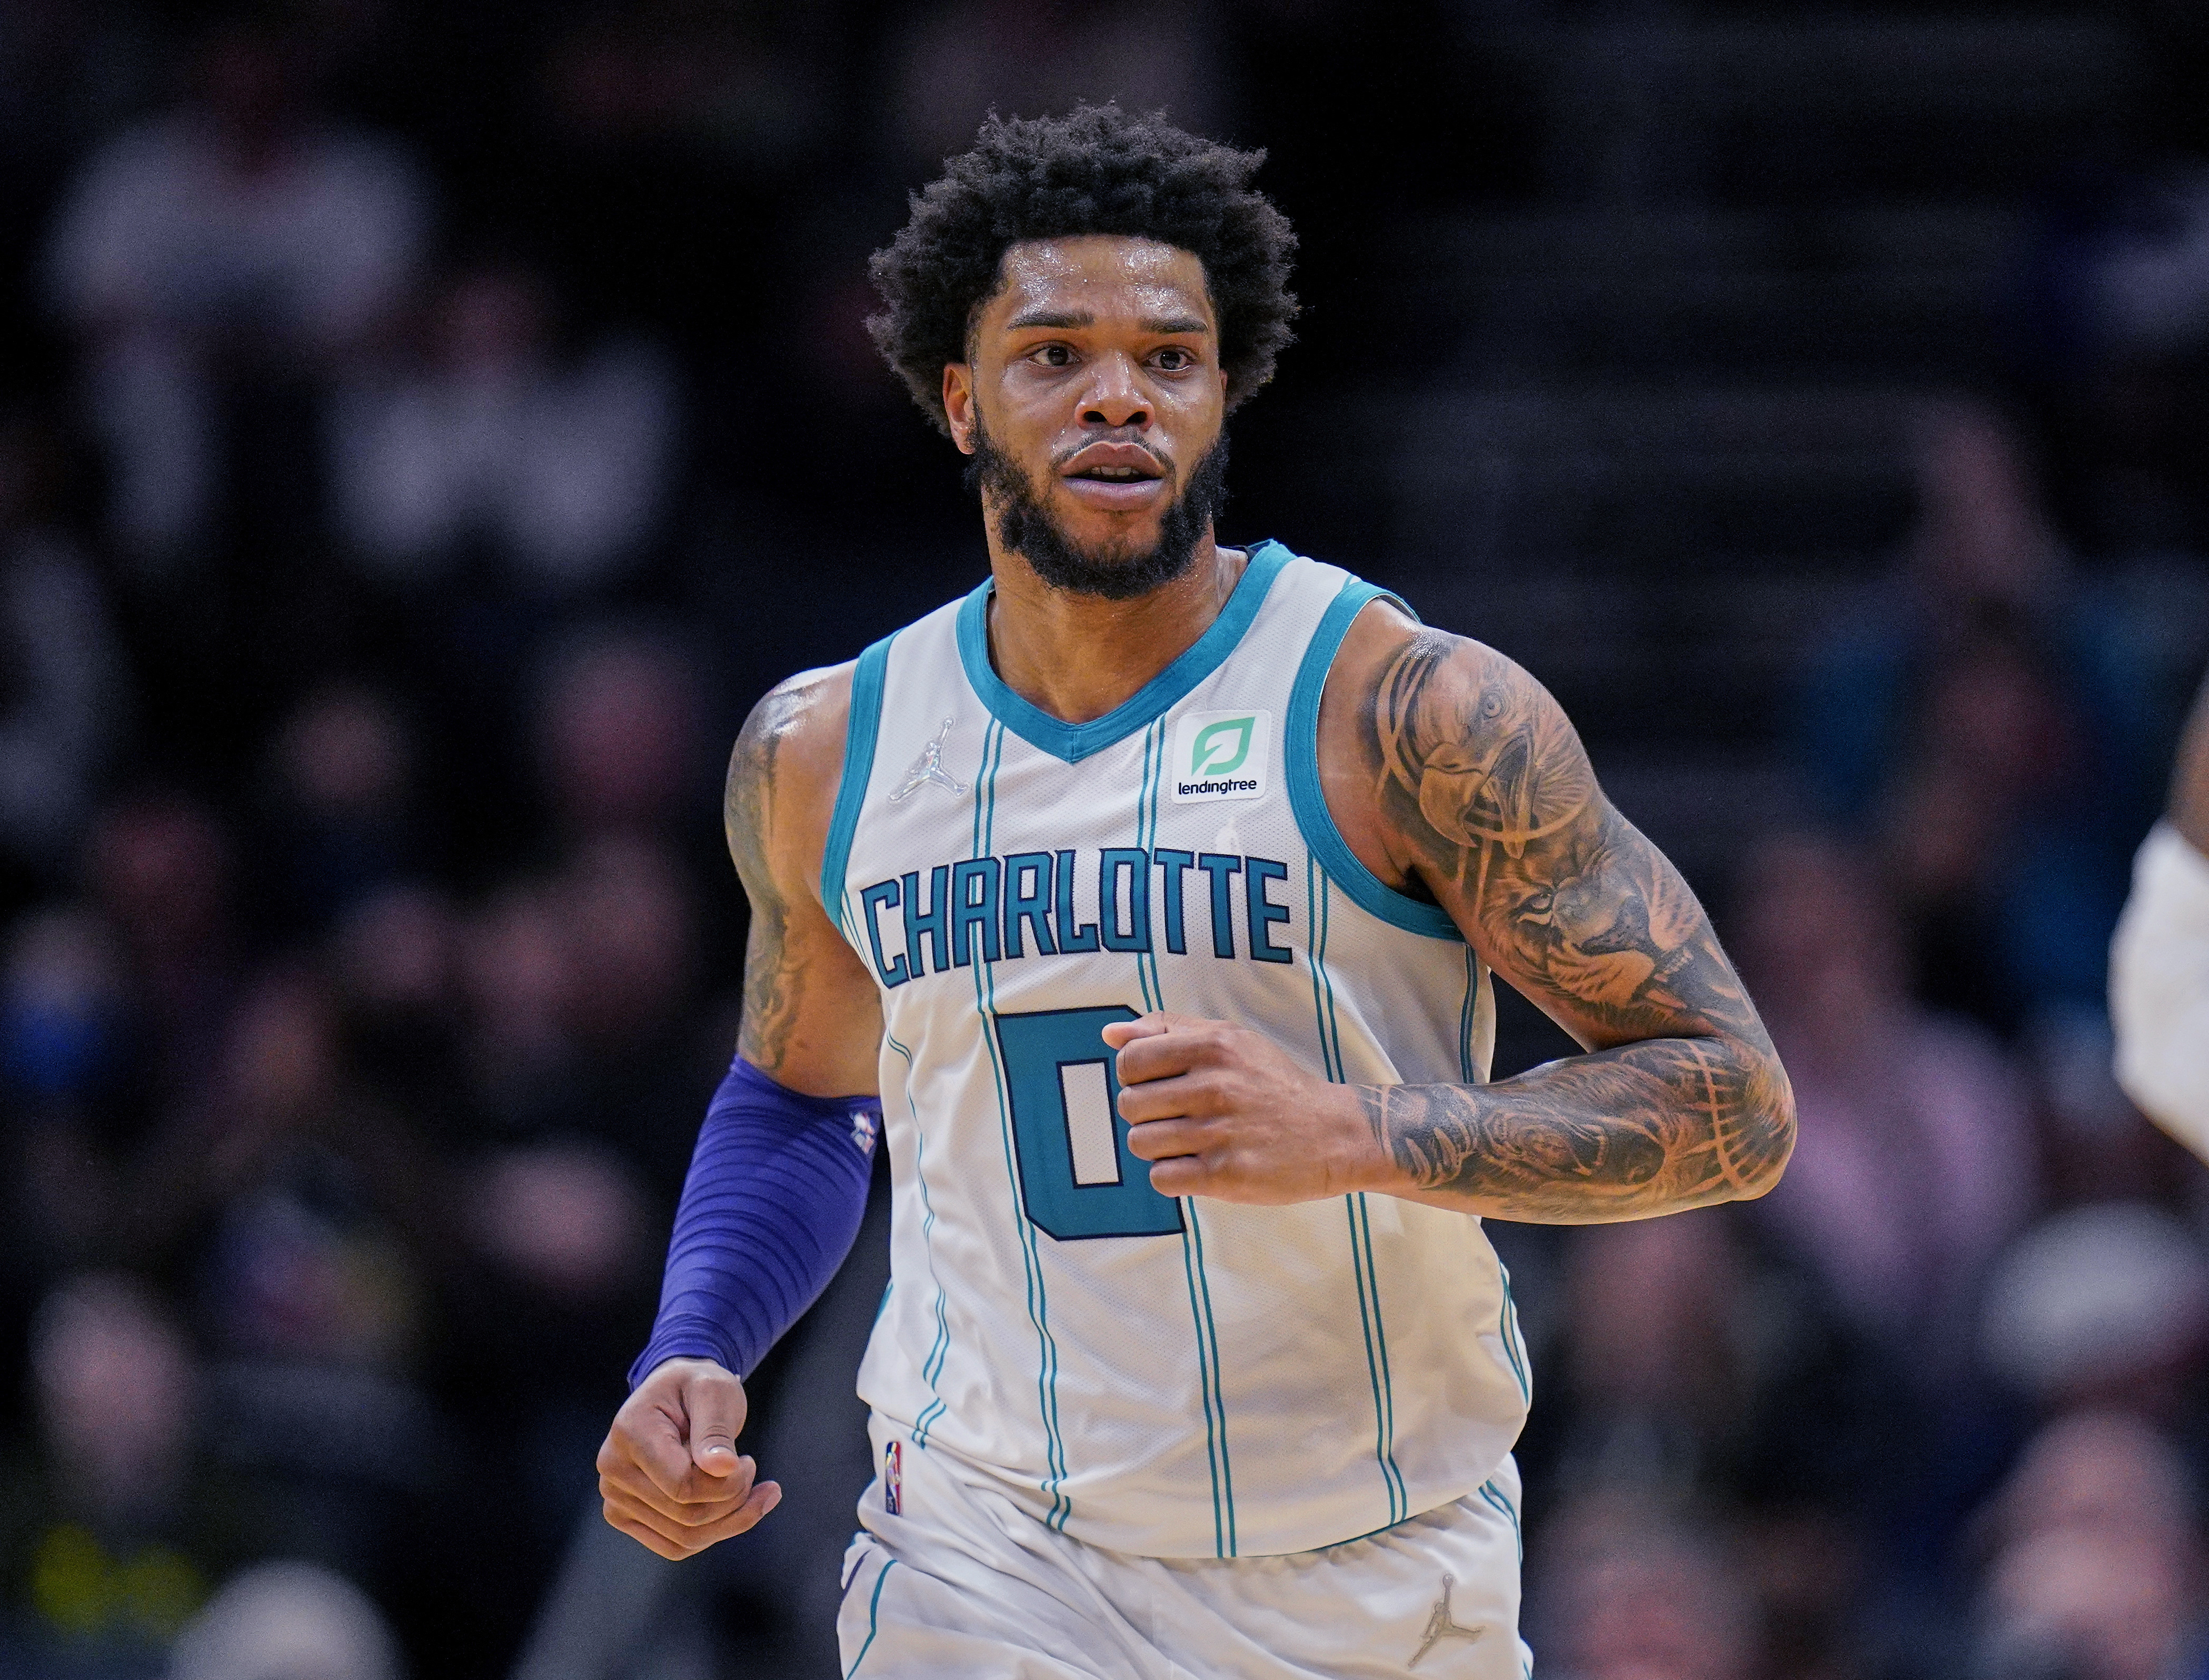 There's more than meets the eye with Hornets' Brandon Miller